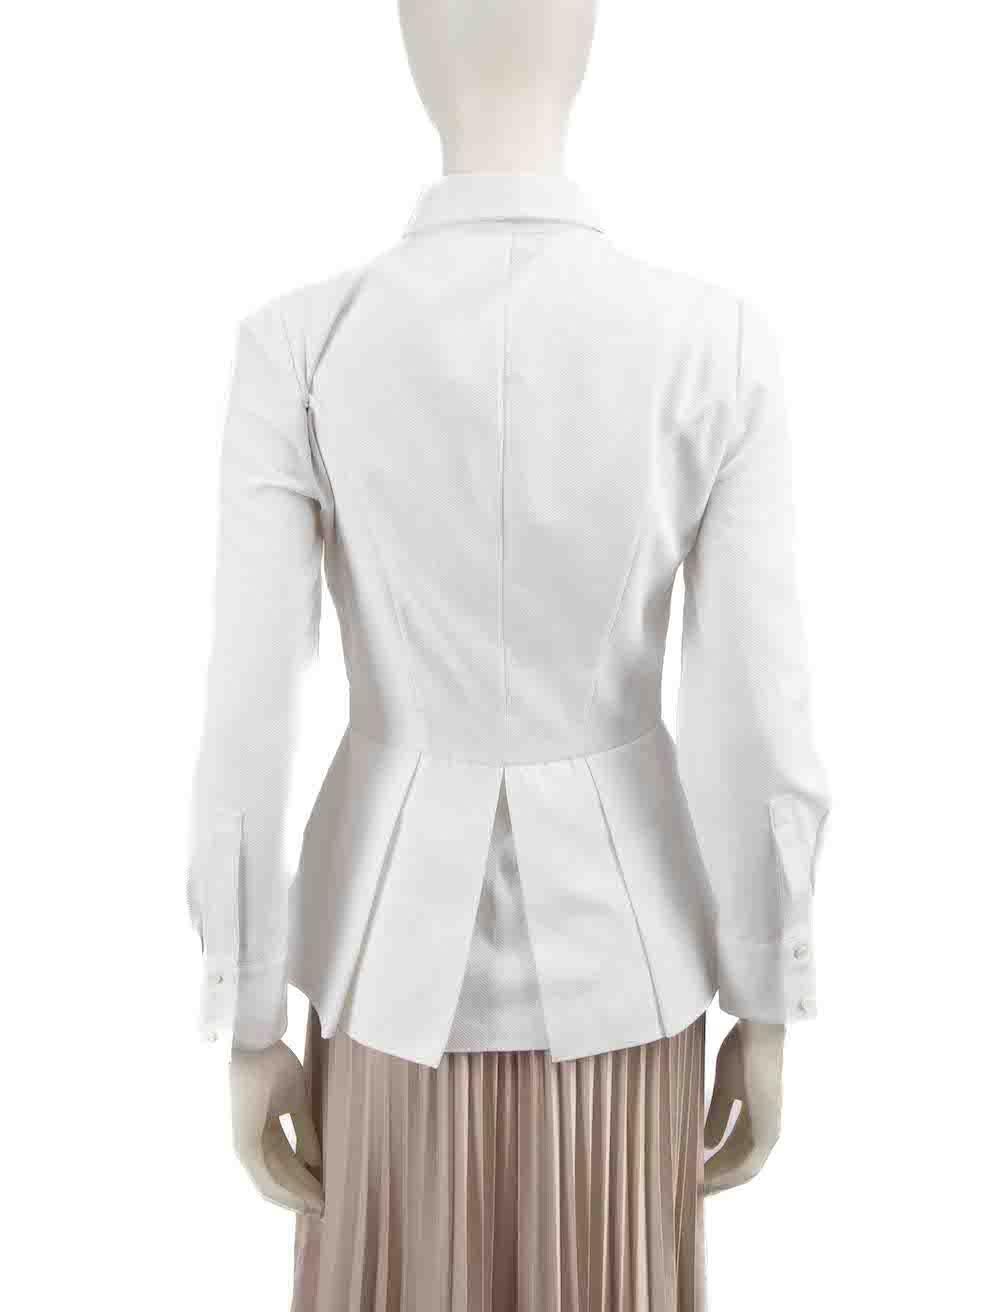 Alexander McQueen White Textured Flared Hem Shirt Size M In Good Condition For Sale In London, GB